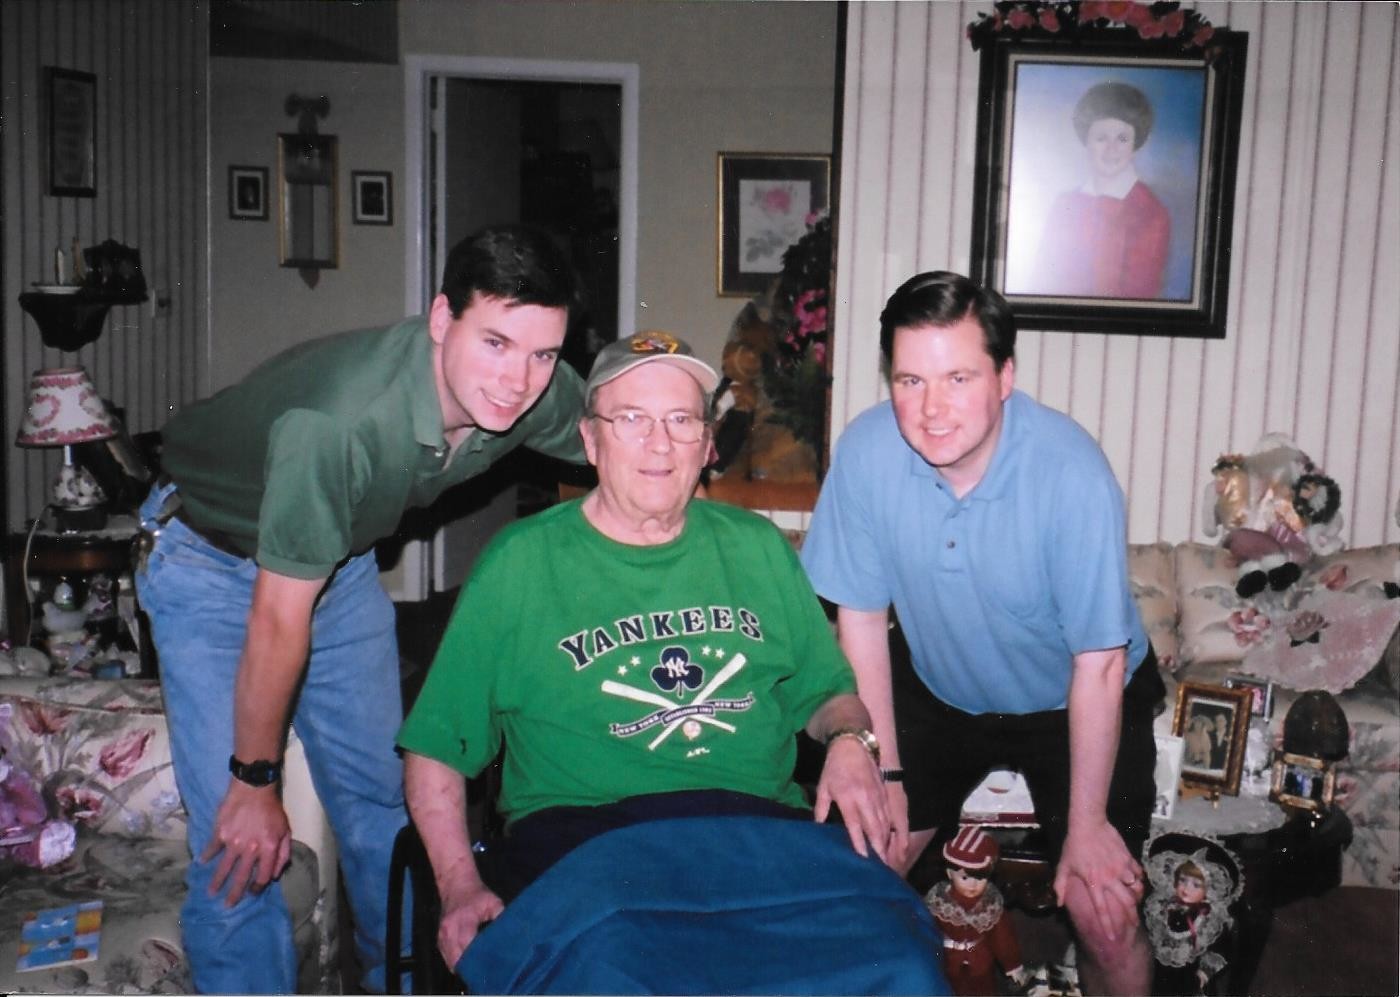 Tom McKevitt Sr., middle, pictured with his sons Scott, left, and Tom Jr., died on June 25. He was 75.